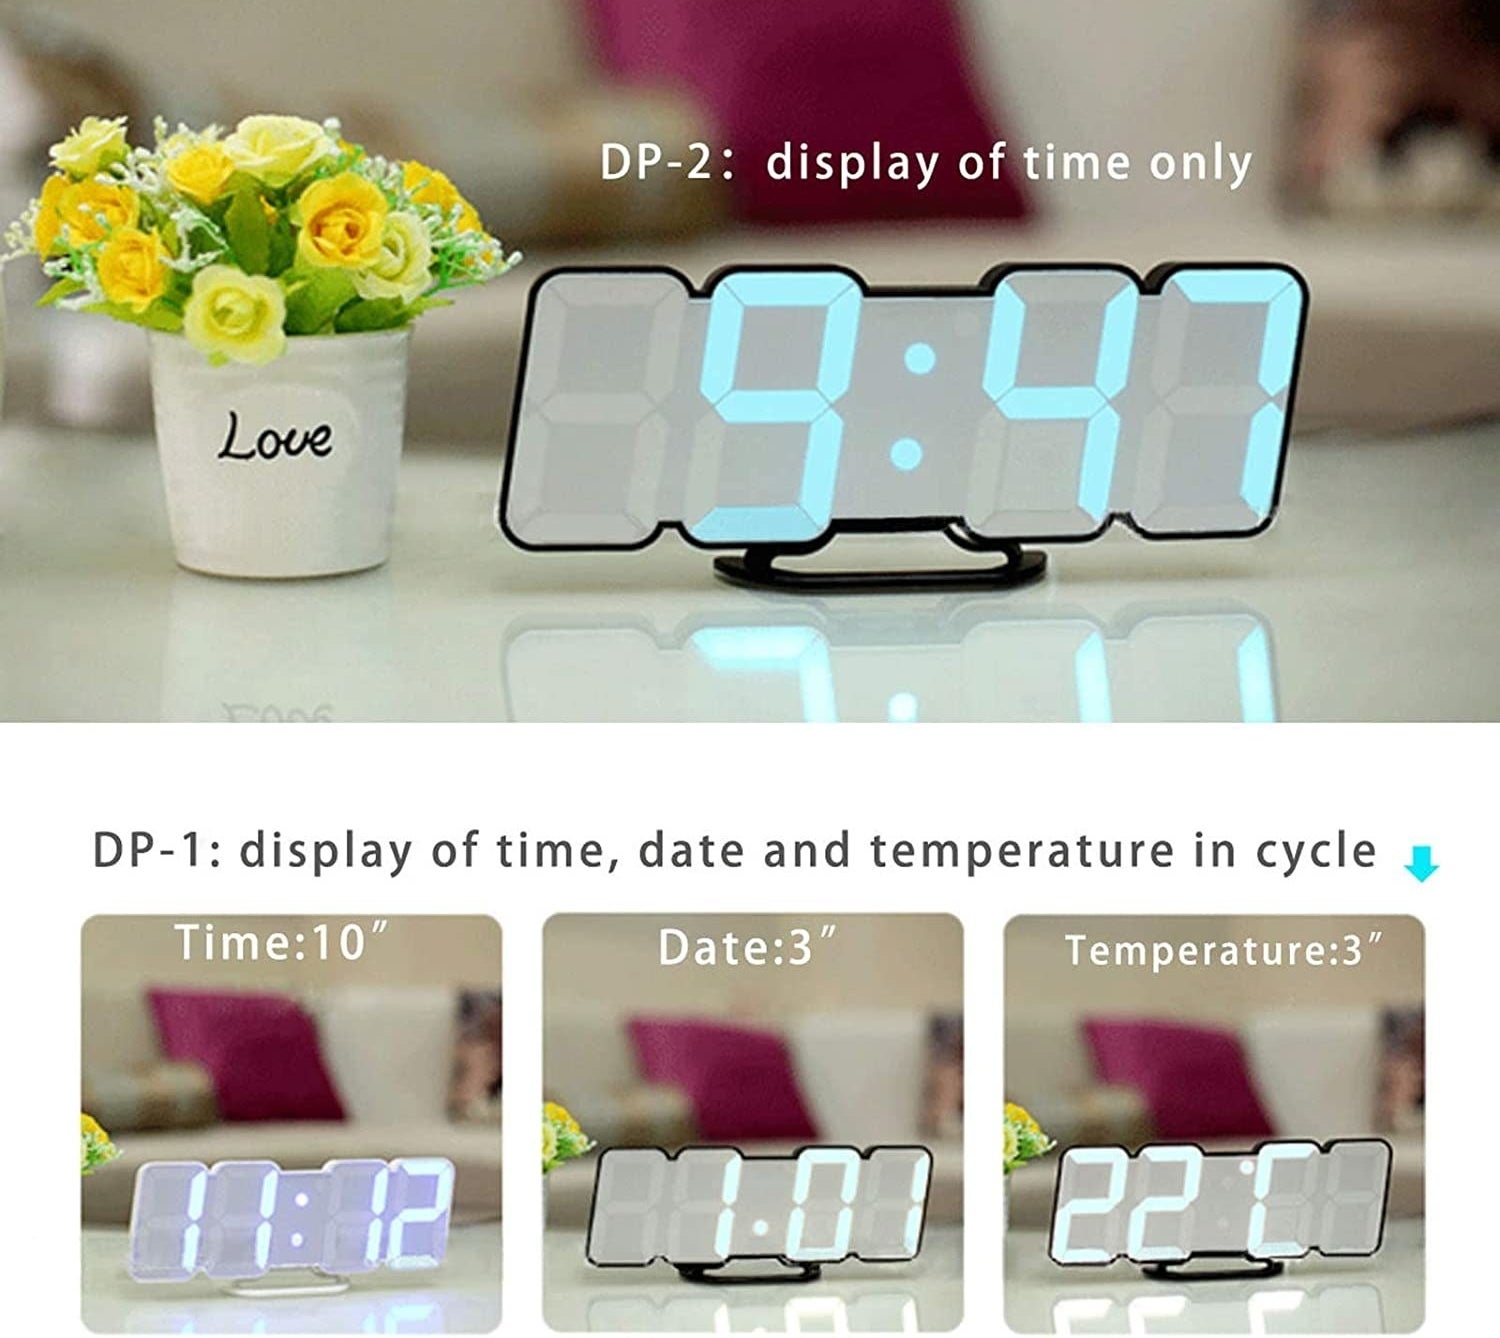 photos showing the clock and the different display modes